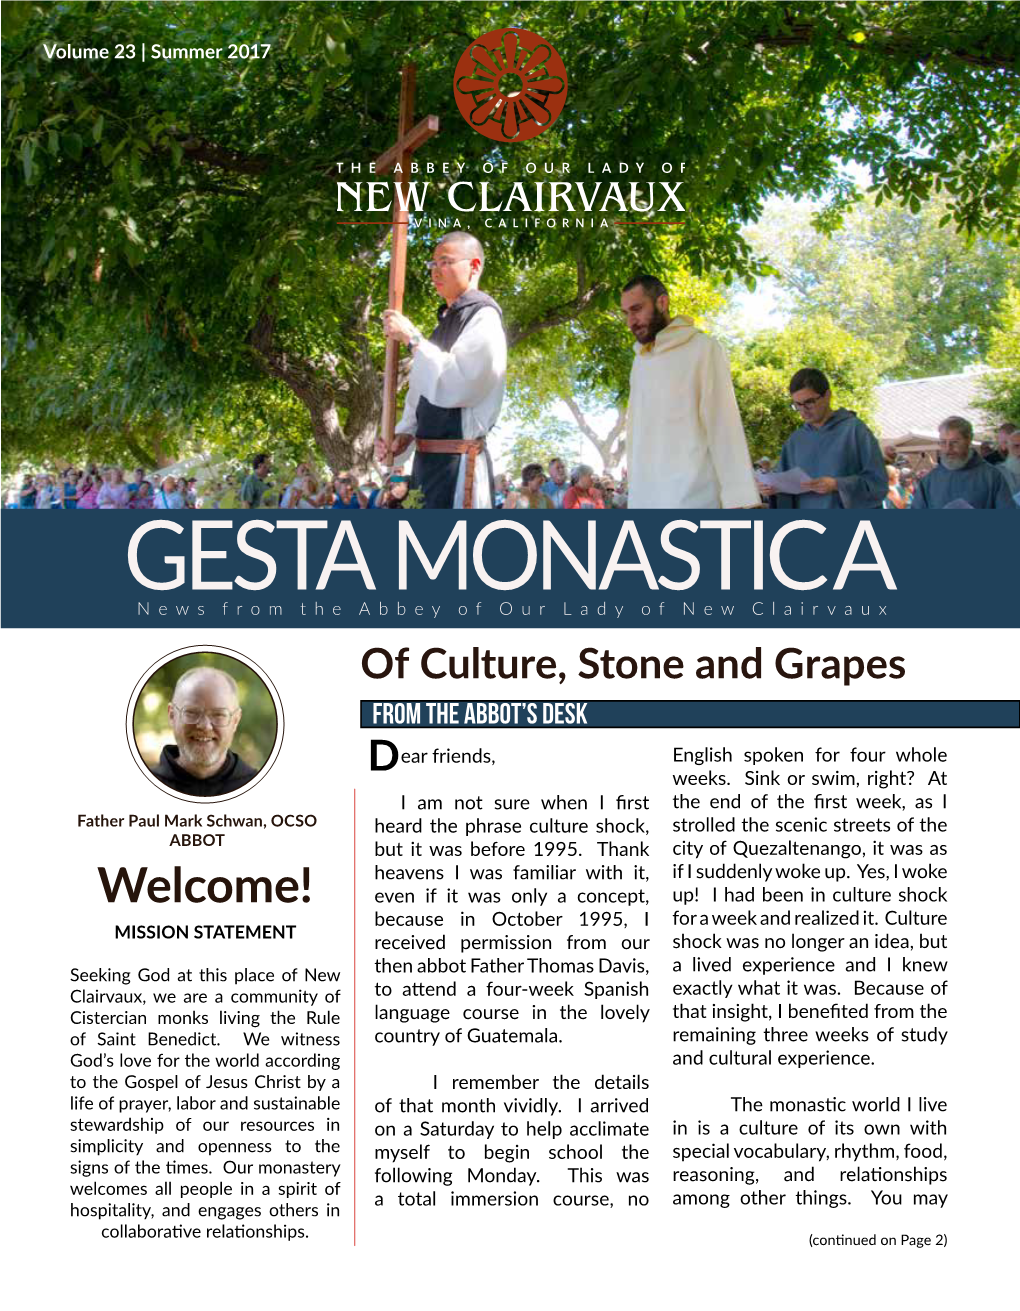 GESTA MONASTICA News from the Abbey of Our Lady of New Clairvaux of Culture, Stone and Grapes from the ABBOT’S DESK